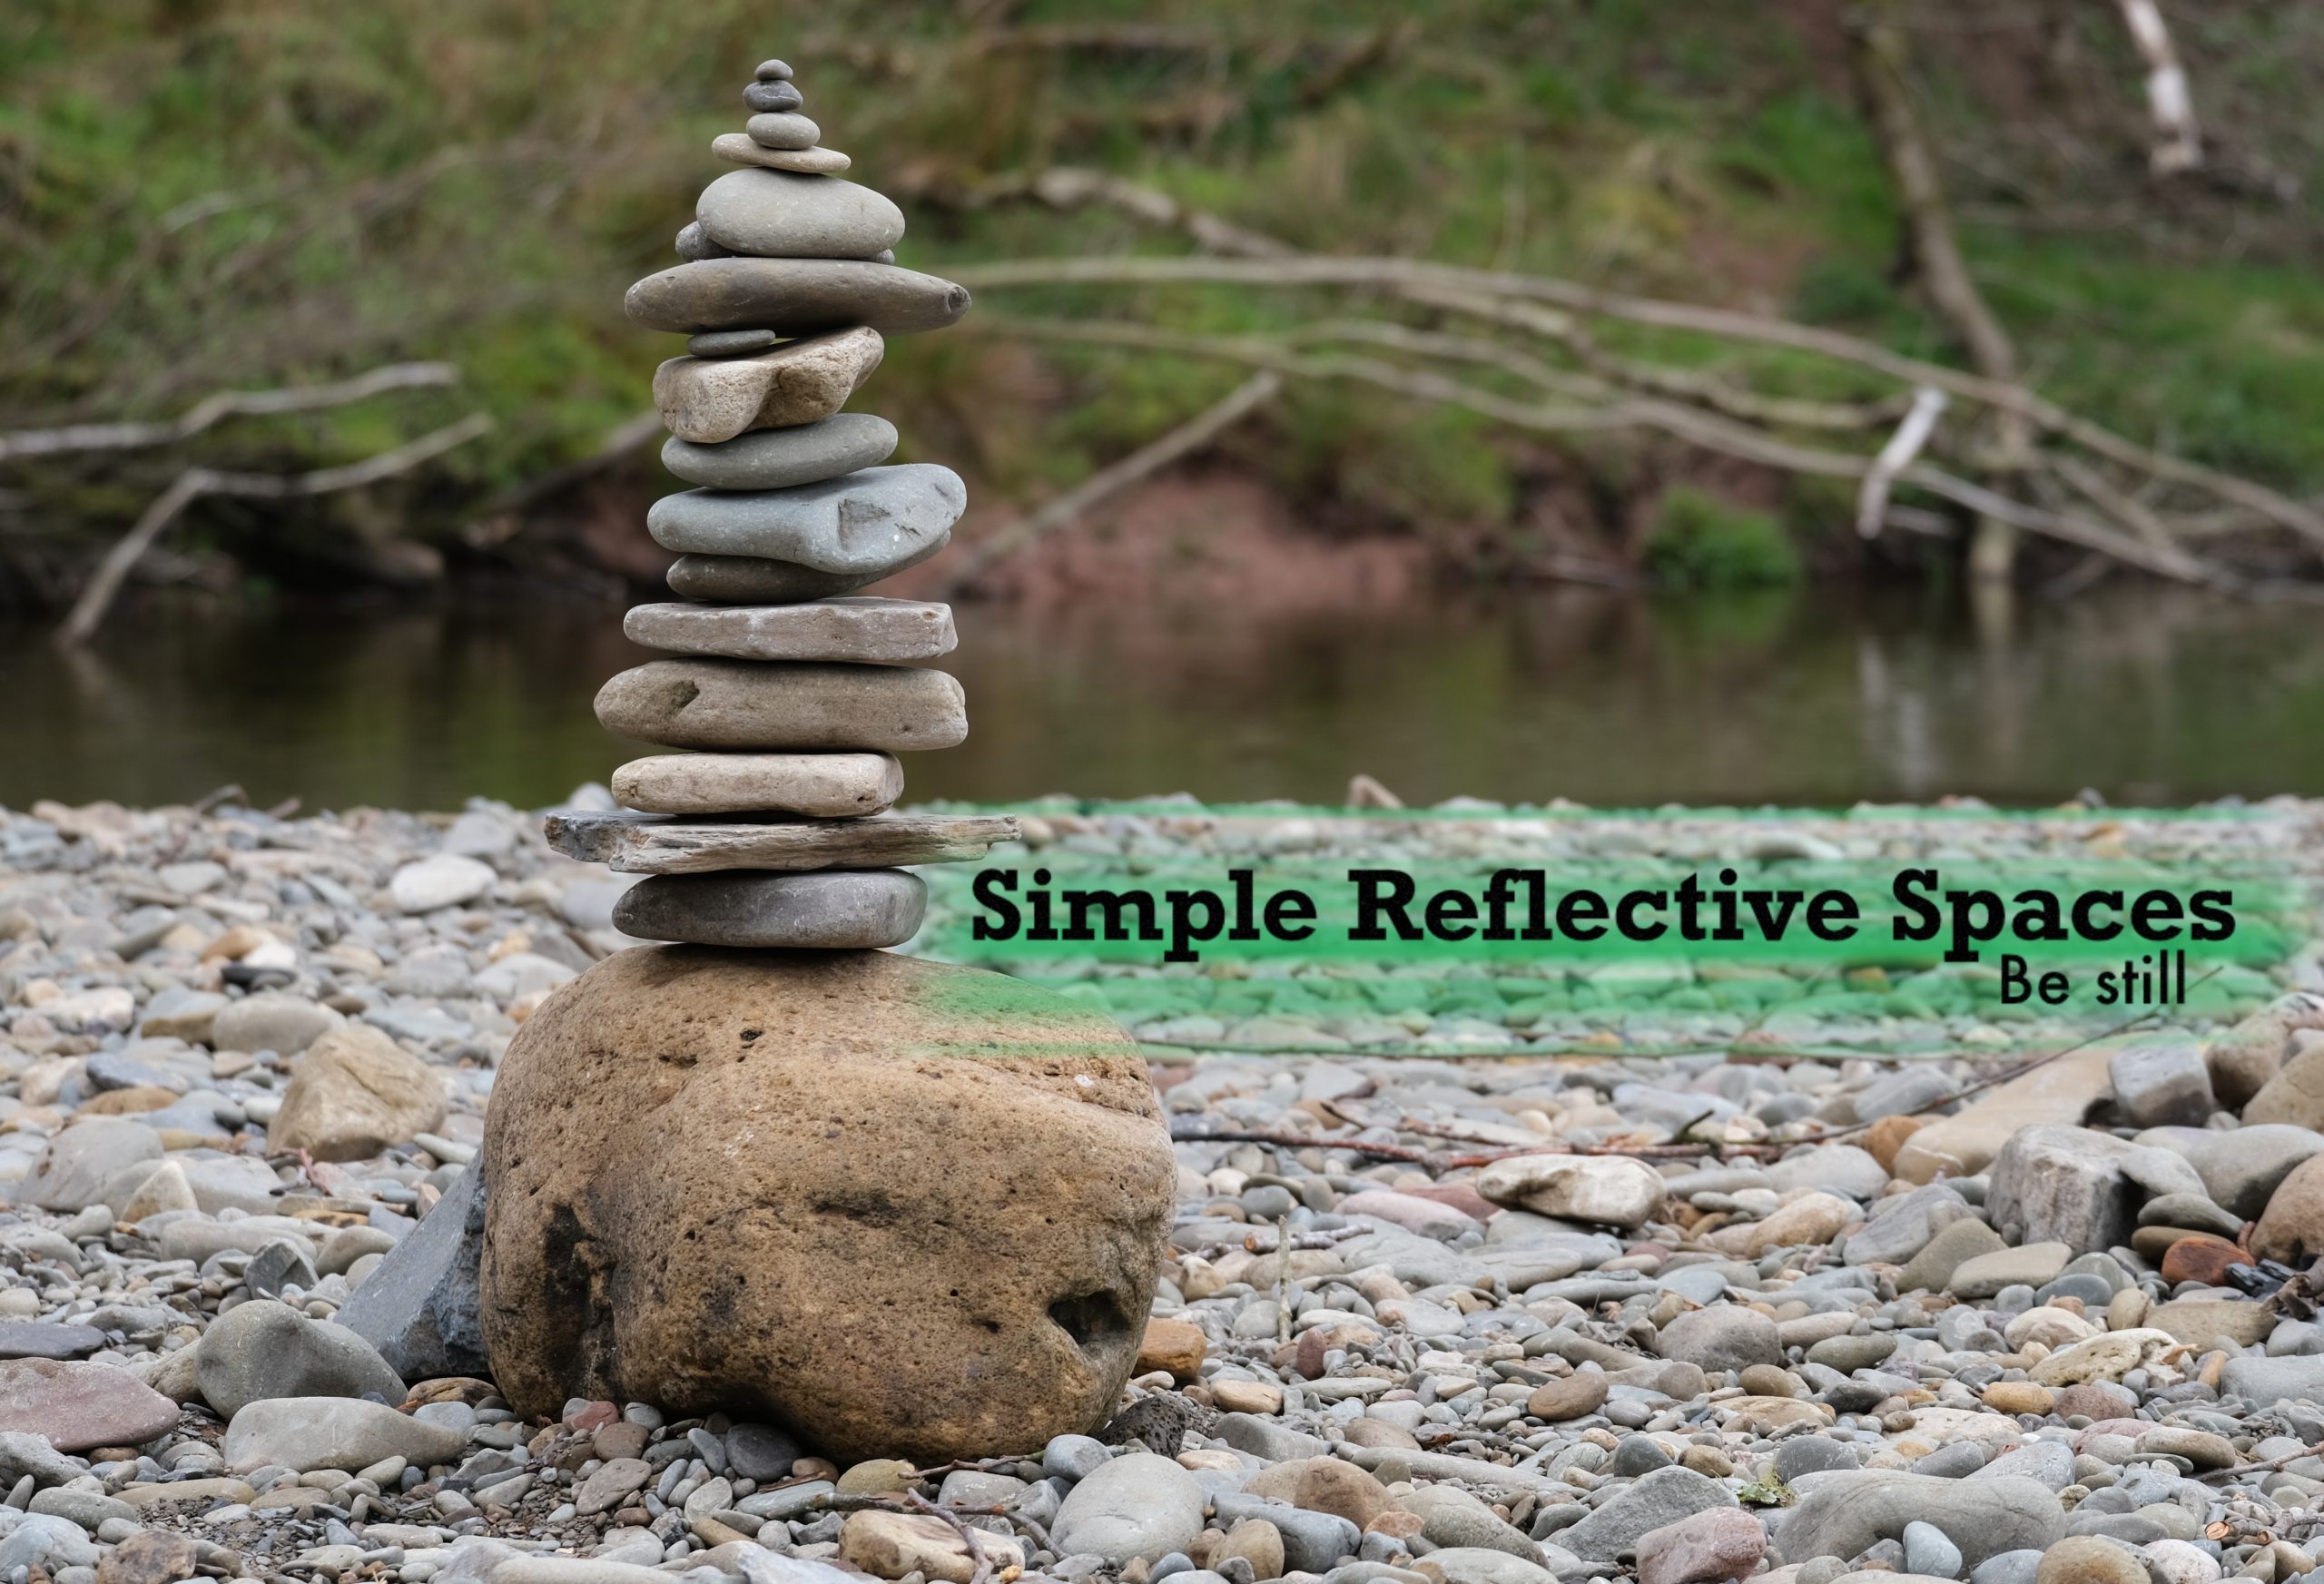 Simple Reflective Spaces